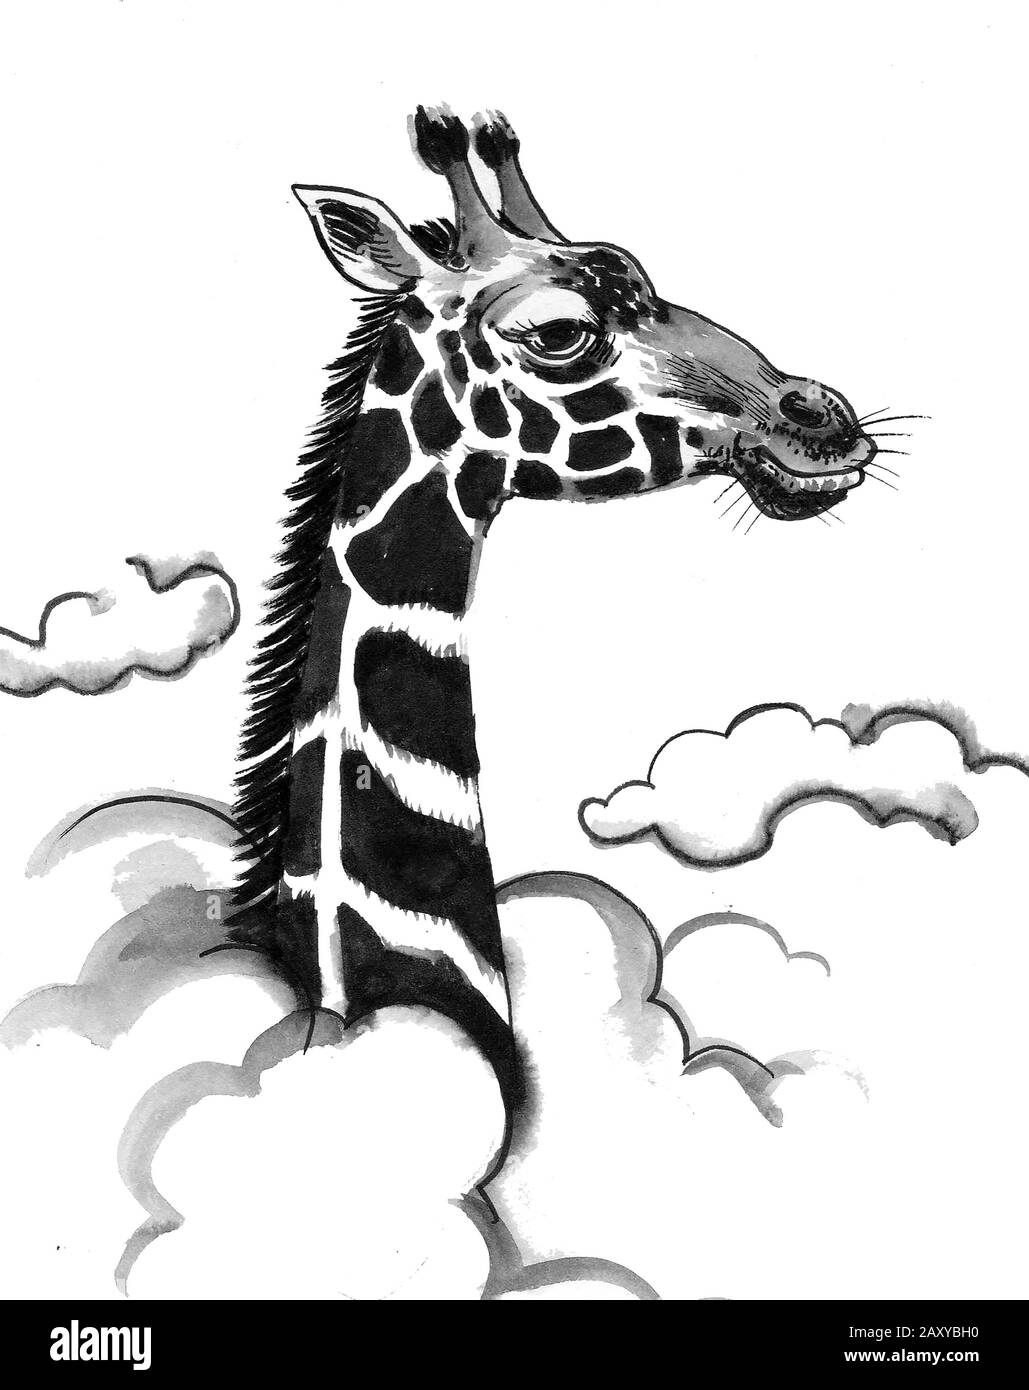 Giraffe in the sky. Ink black and white drawing Stock Photo